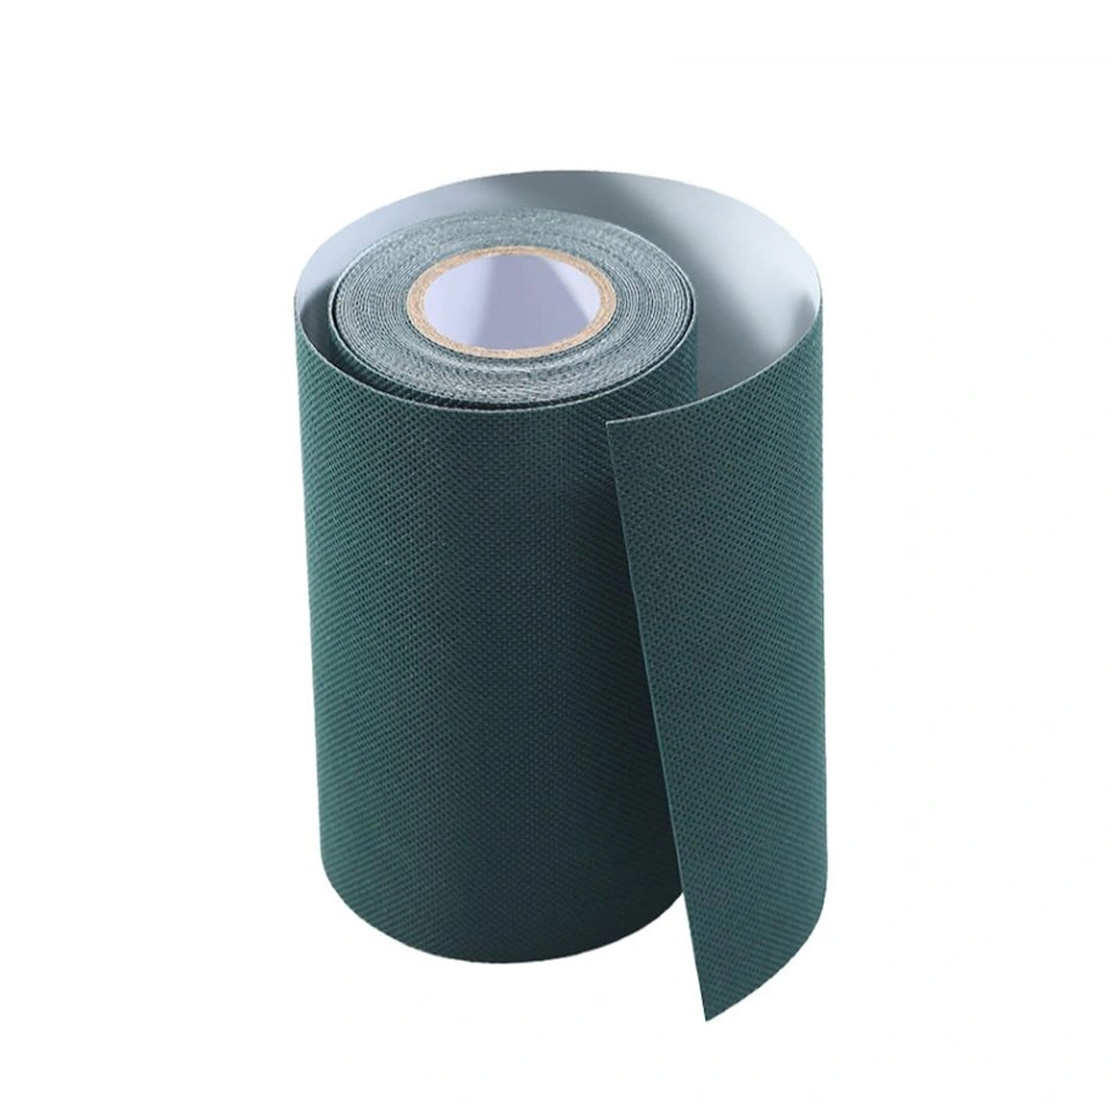 Shop Online: Synthetic Grass Self-Adhesive Joining Tape